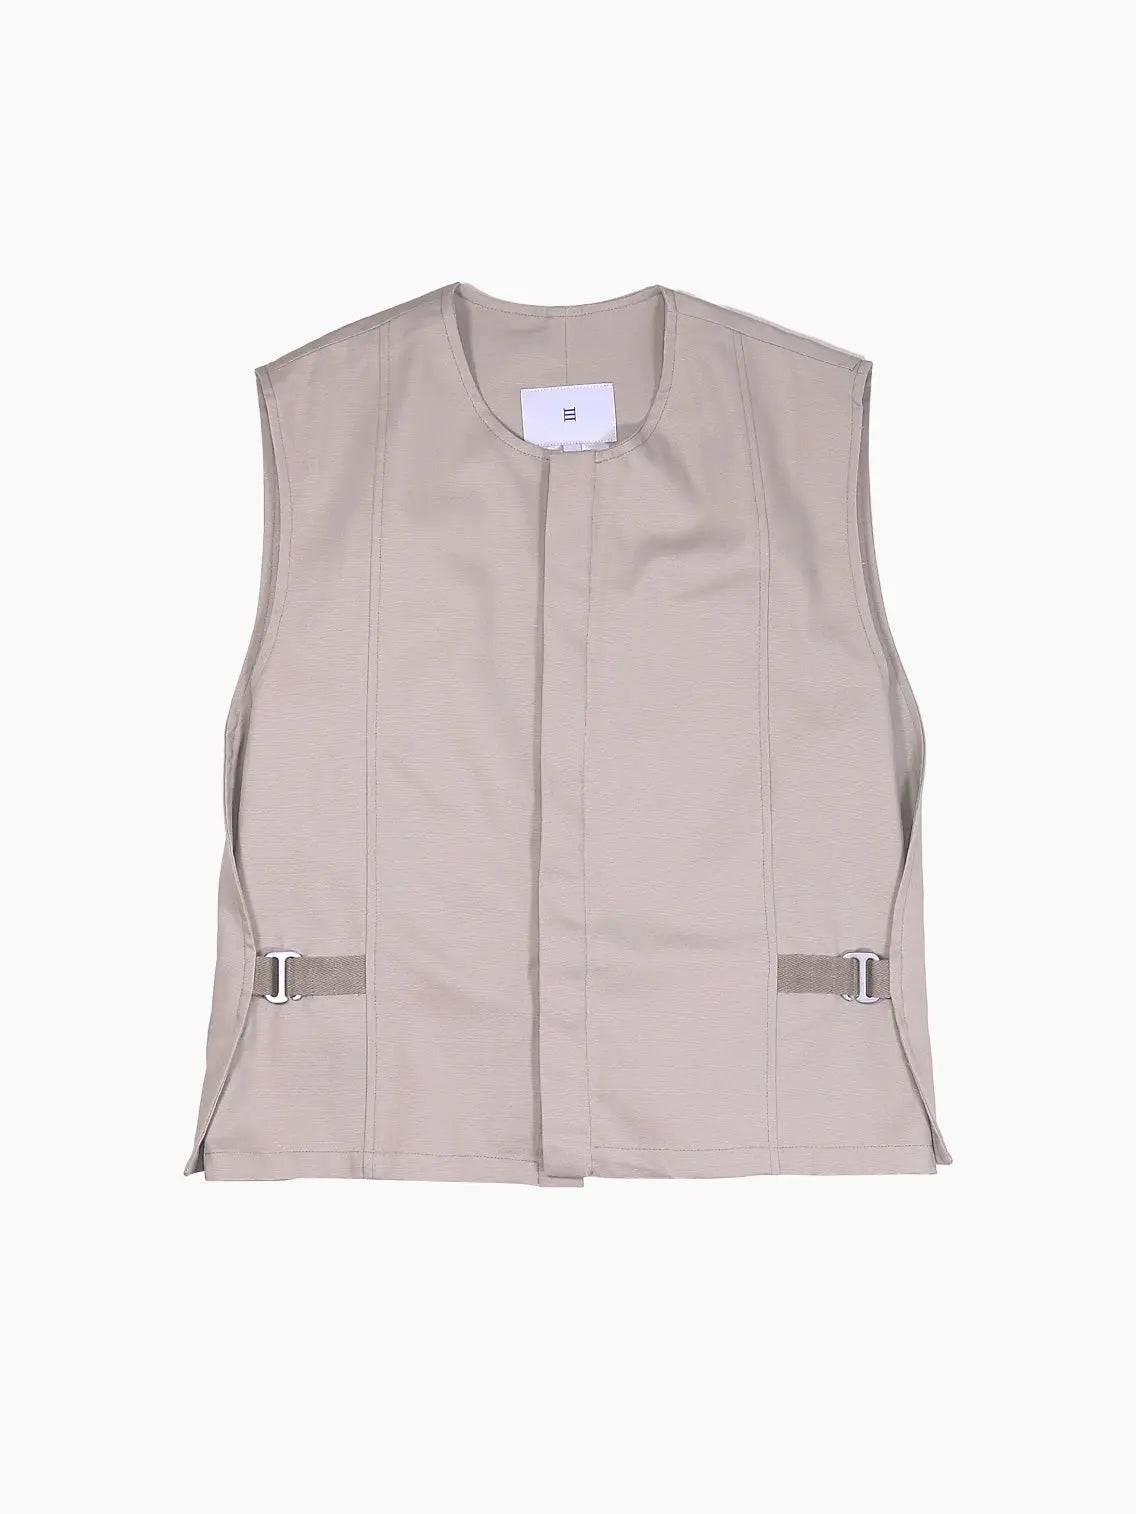 A sleeveless, light beige utility vest with minimalistic design, featuring side buckle adjustments and a front concealed closure. The lightweight fabric contributes to its plain, unembellished appearance. Available exclusively at Bassalstore in Barcelona. This is the Beige Vest by Bastida x Bassal Store.